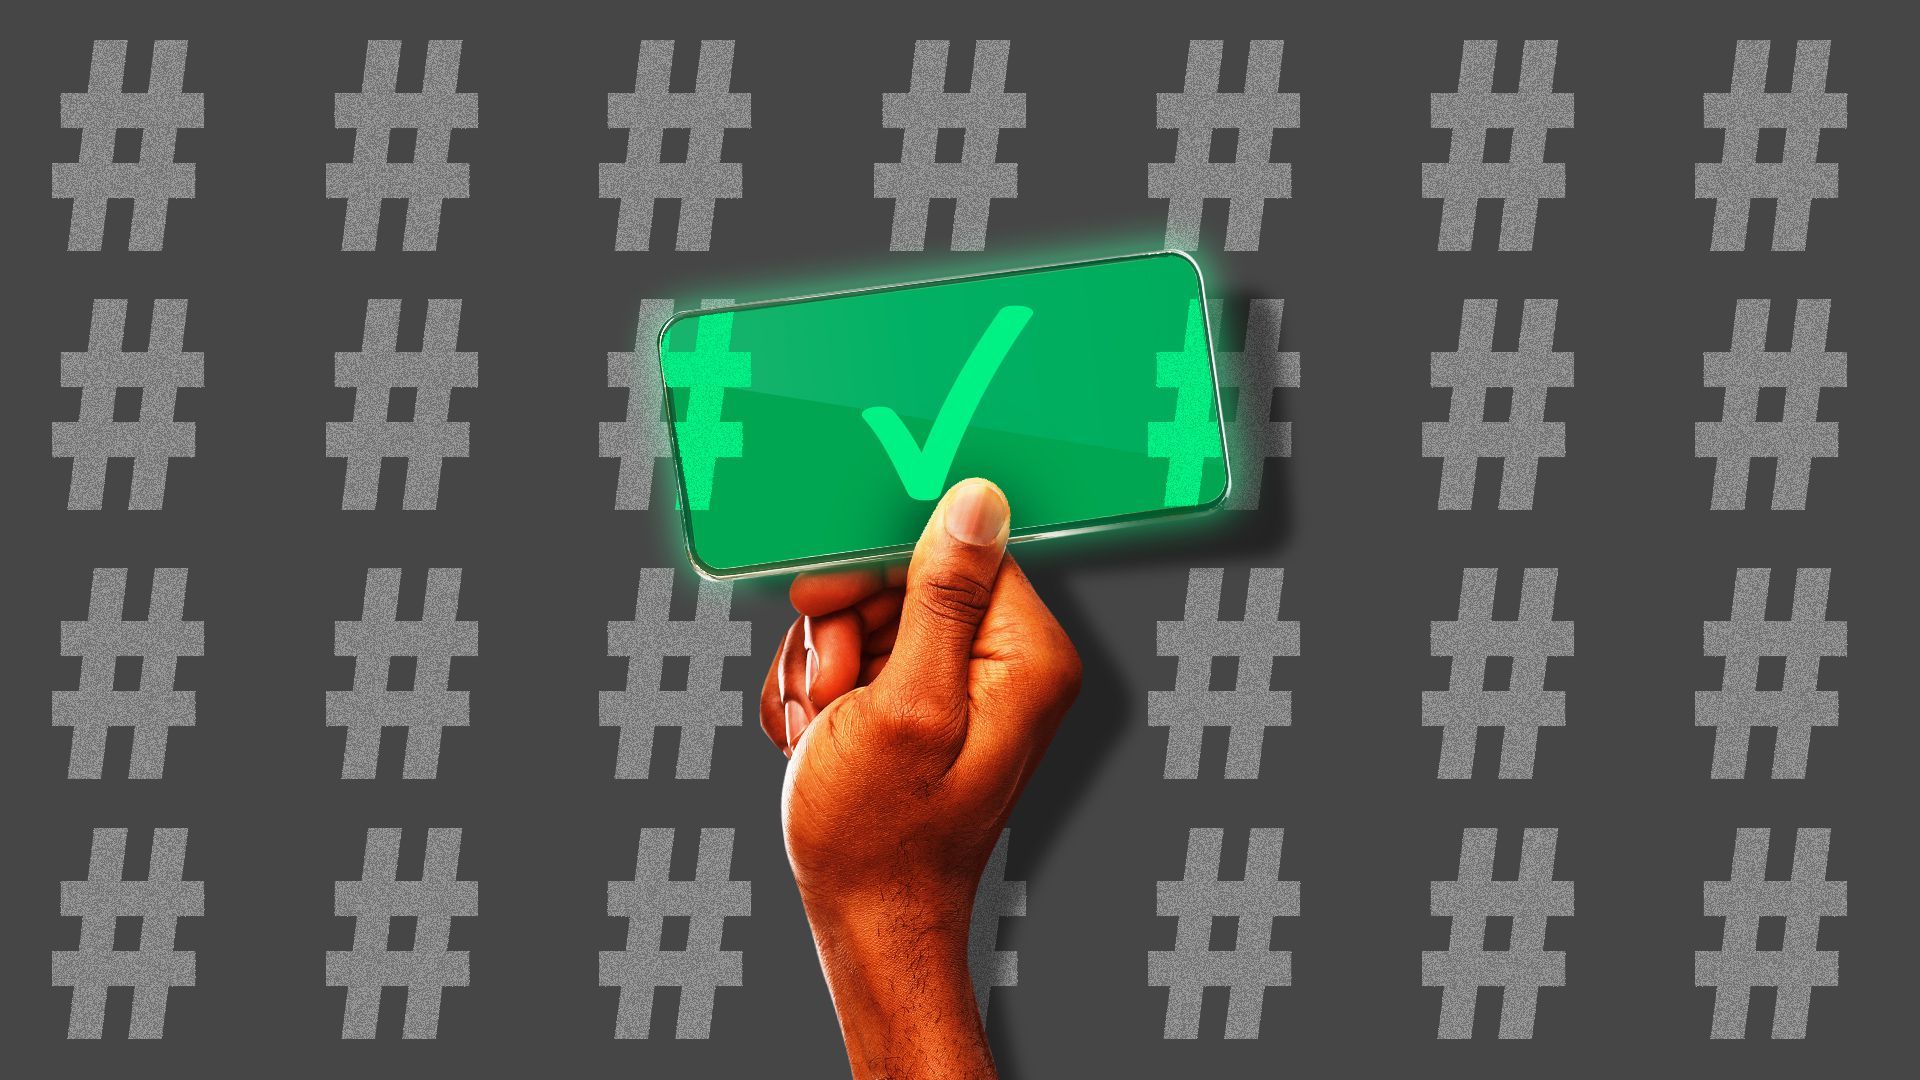 Illustration of a hand holding a phone over a pattern of hashtags revealing a checkmark indicating truth. 